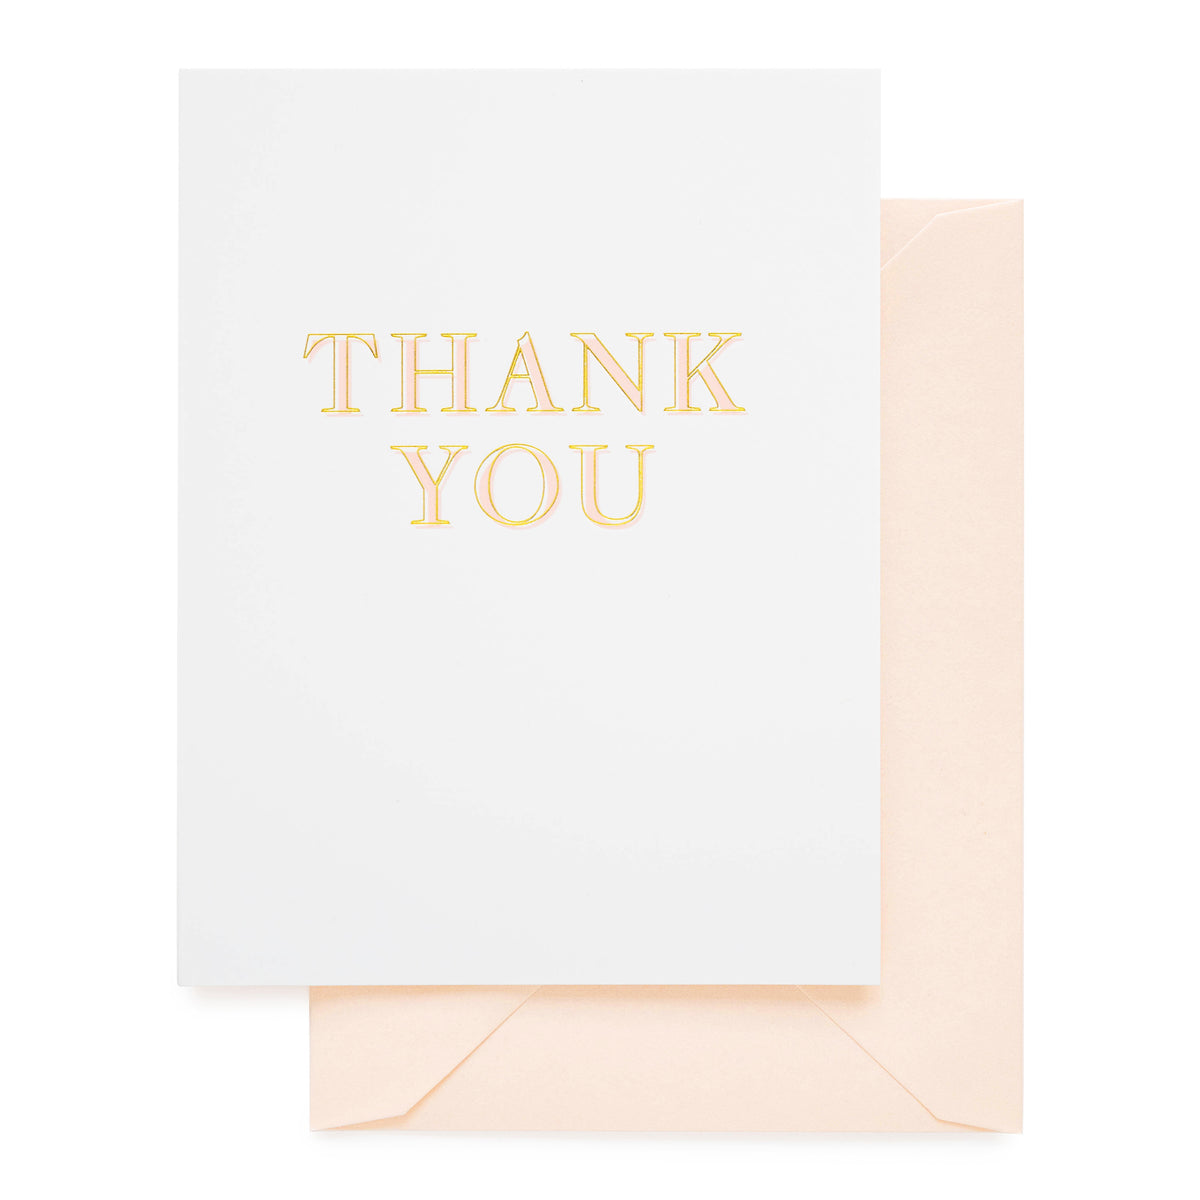 Etched pink and gold foil thank you card printed on white paper with a pink envelope